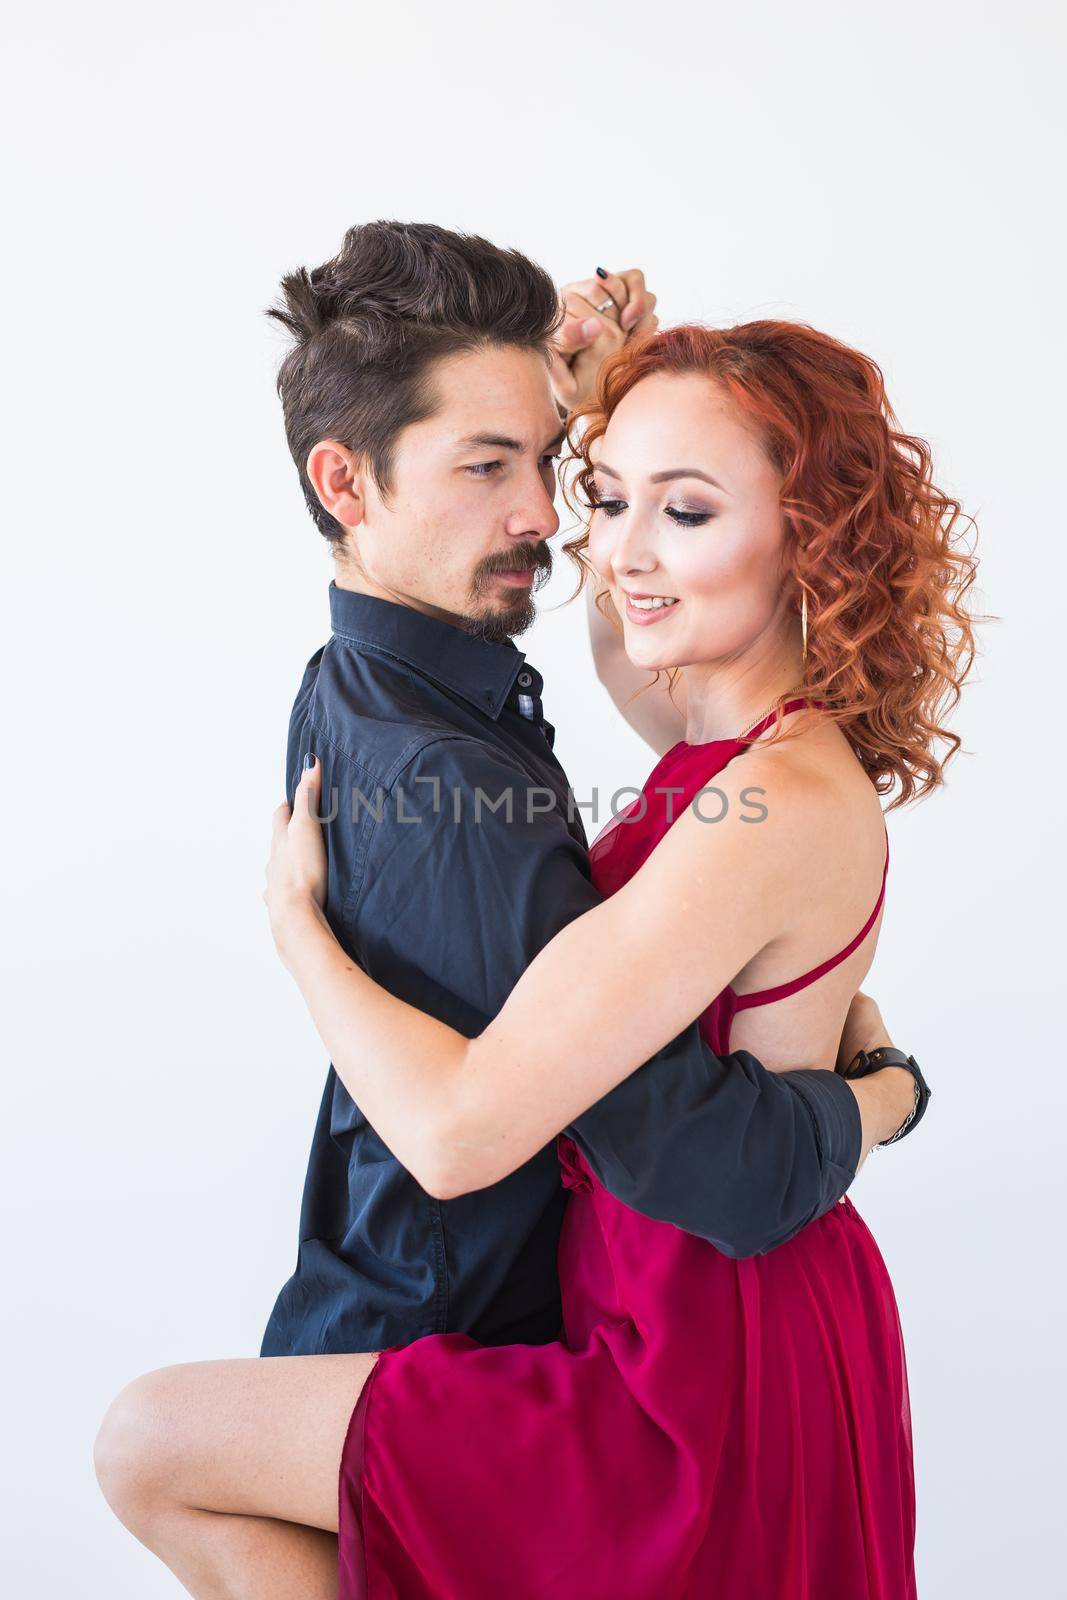 Social dance, bachata, kizomba, salsa, tango concept - Close up portrait of woman man dressed in beautiful outfits over white background.